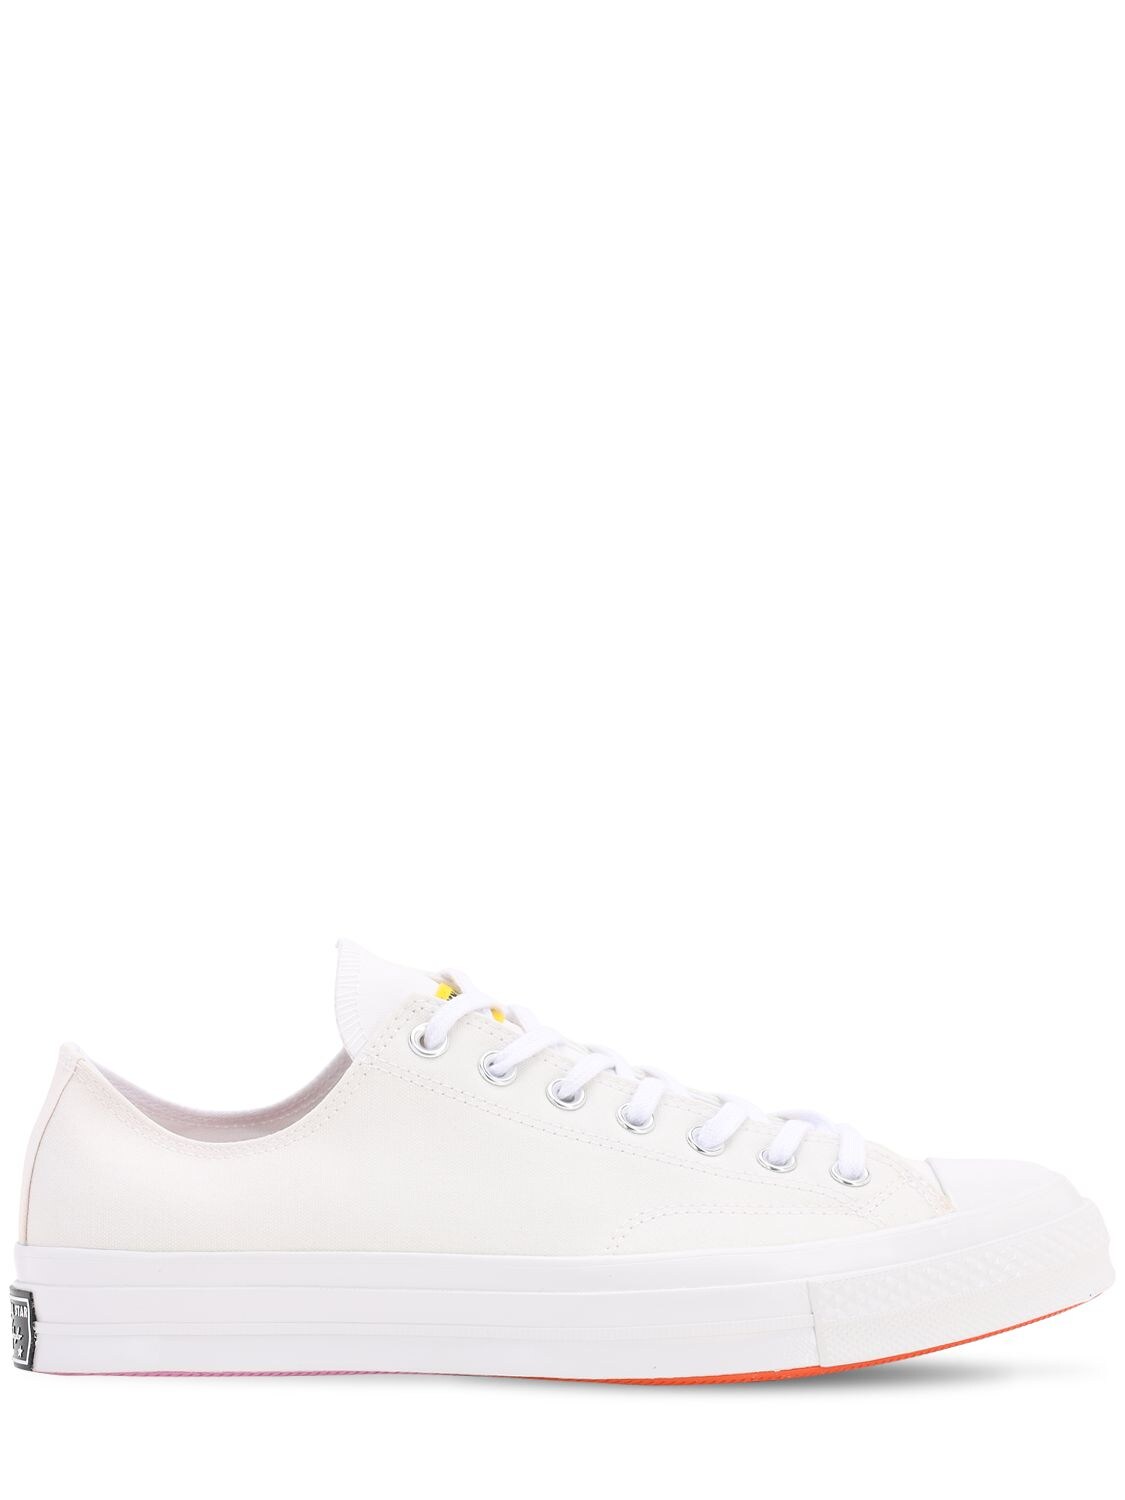 CONVERSE CHINATOWN MARKET CHUCK 70 OX SNEAKERS,70IXGN021-MTAY0